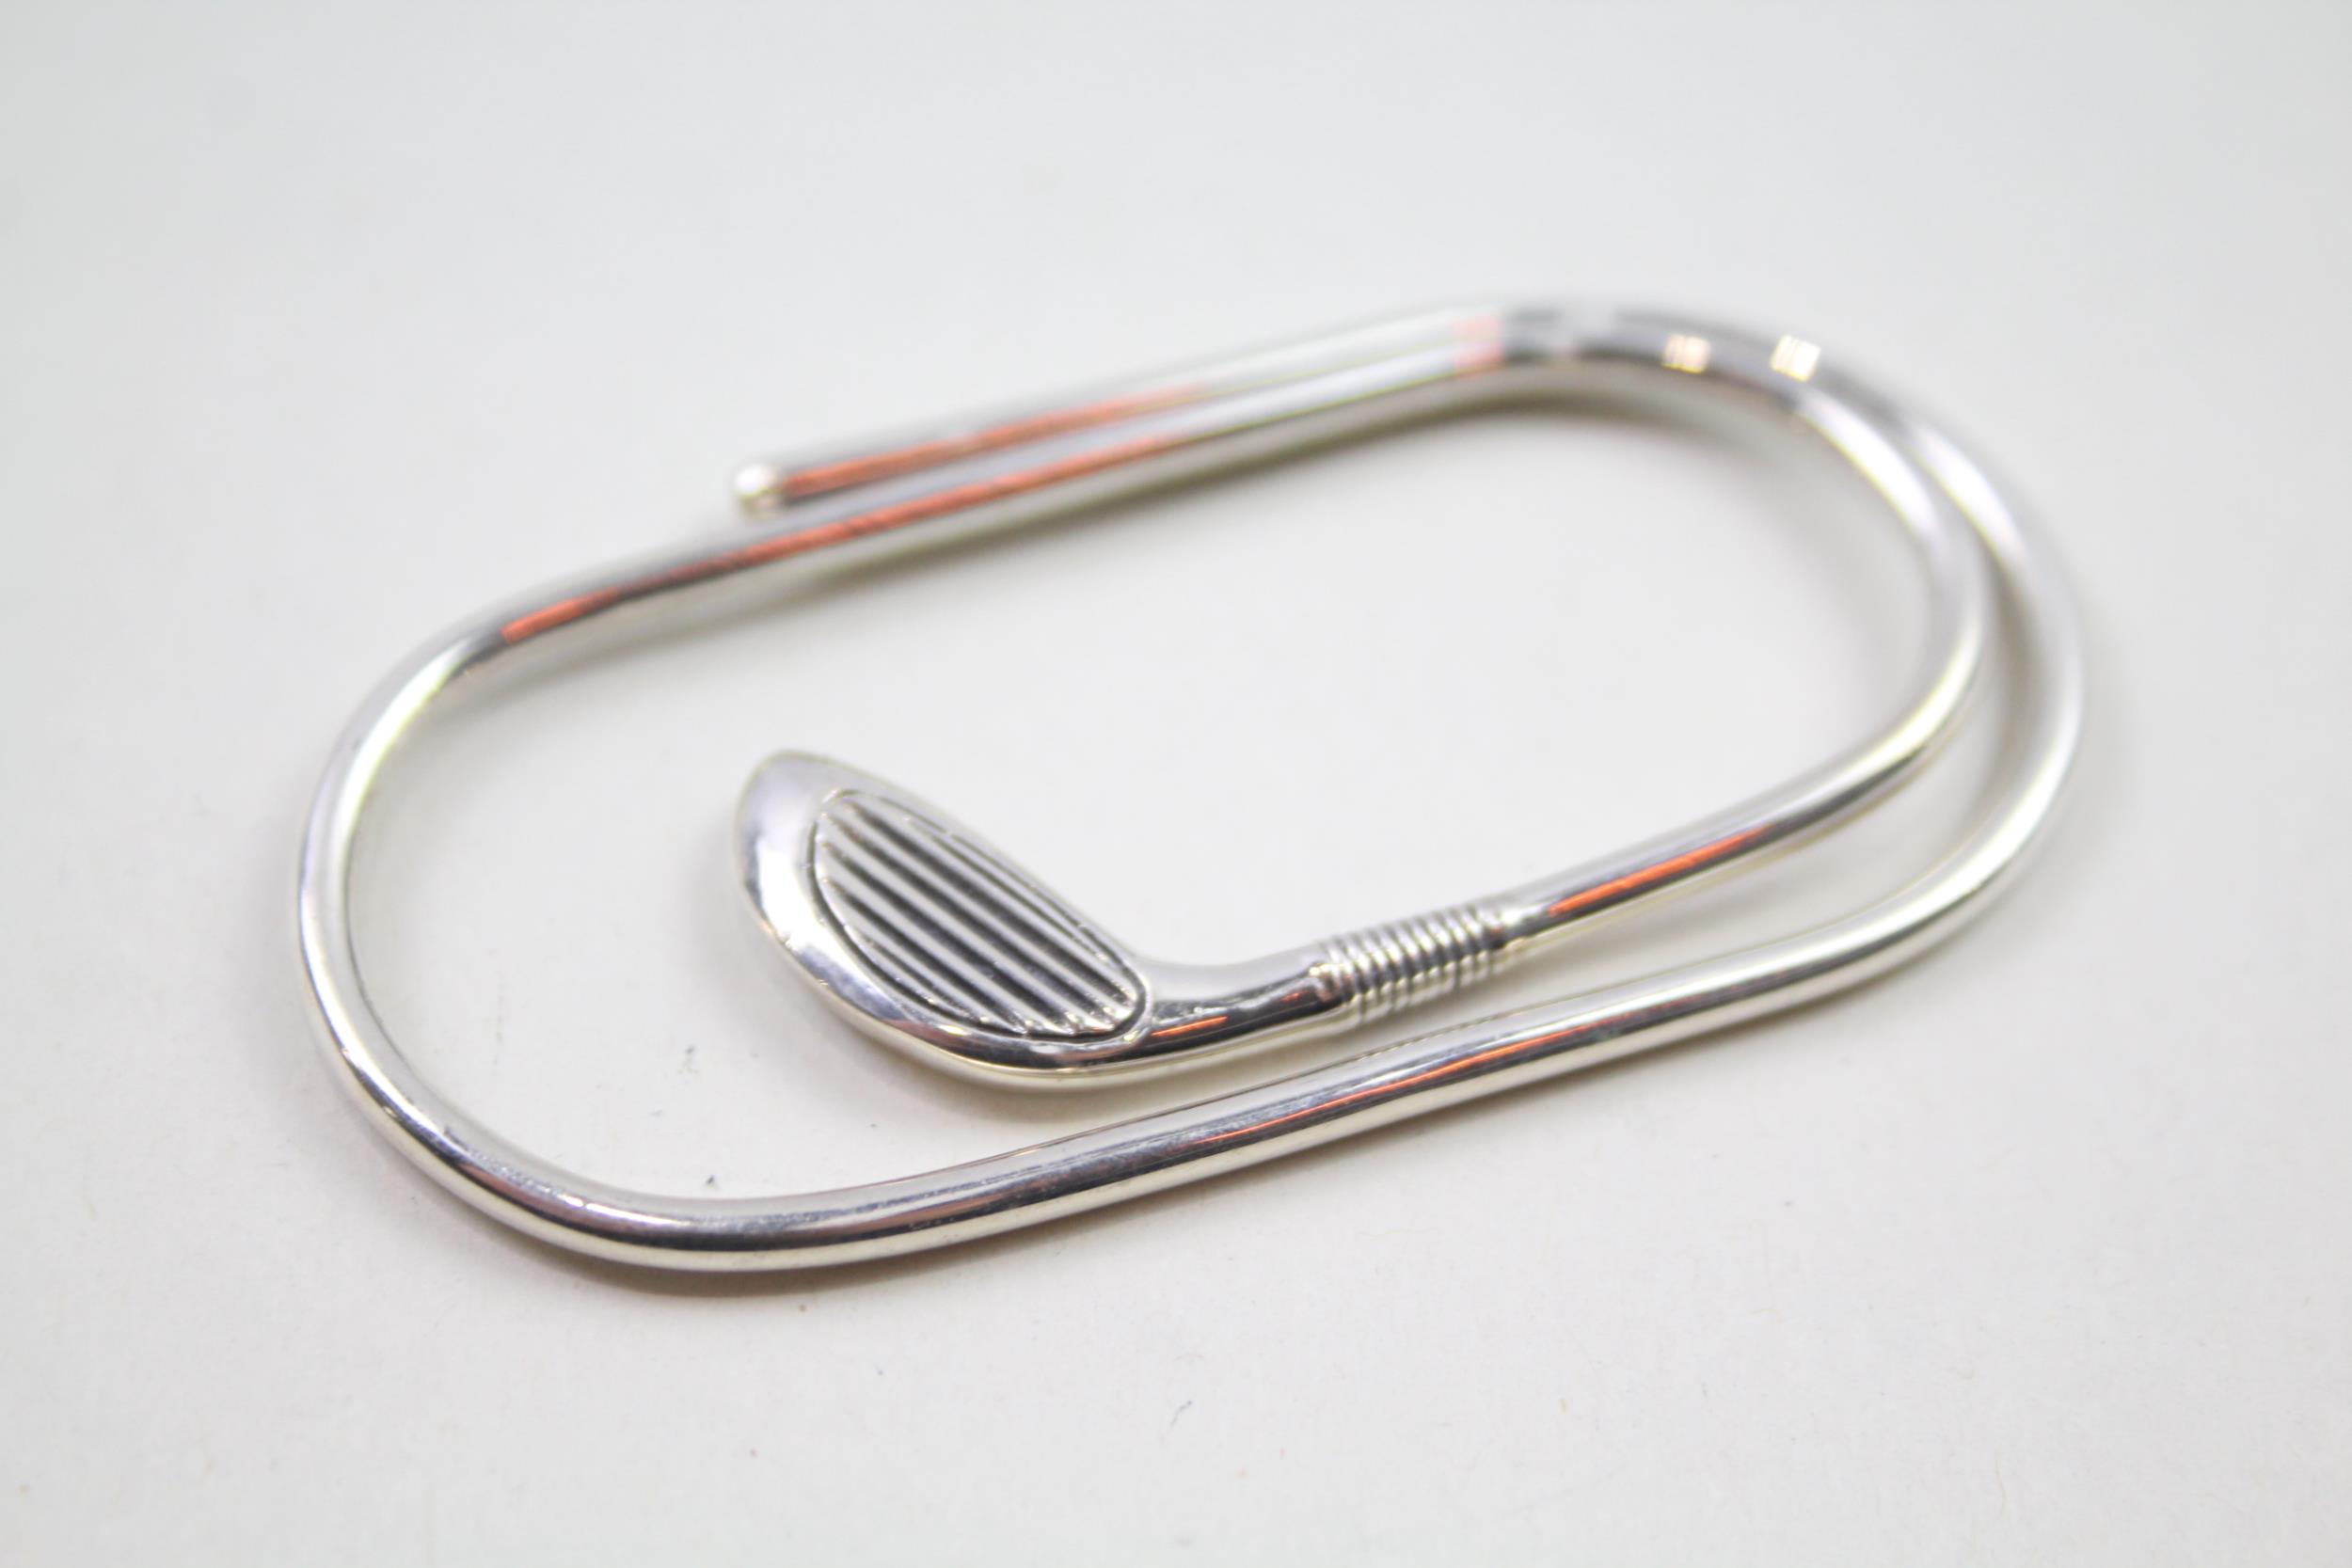 Vintage Stamped .925 Sterling Silver Novelty Golf Club Paperclip Bookmark (17g) // Length - 7cm In